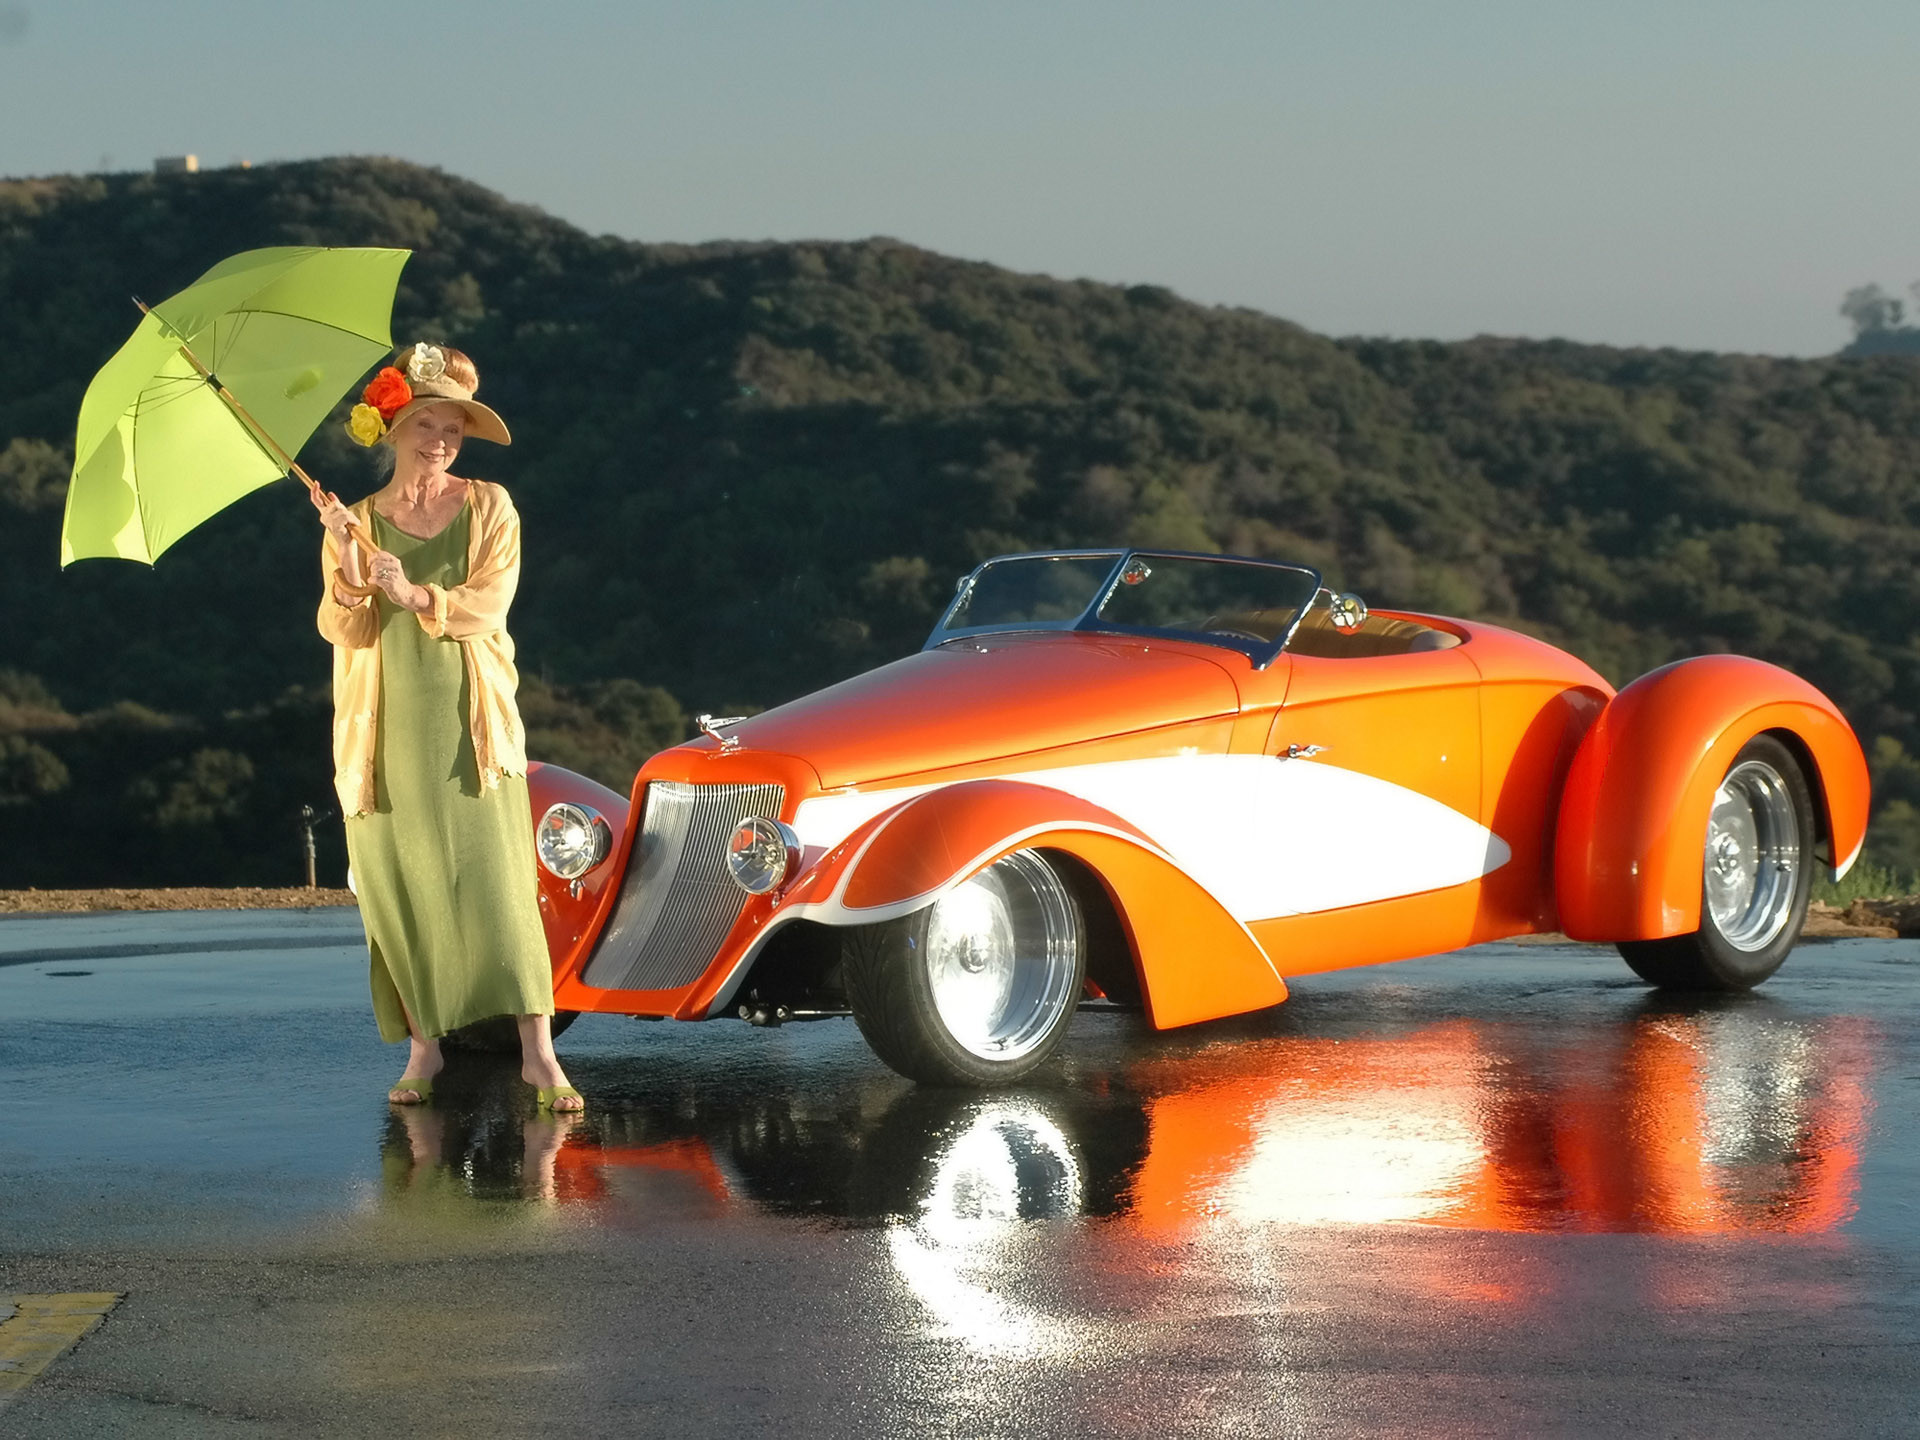 1920x1440 Deco Rides Boattail Speedster by Chip Foose - Woman with Umbrella -   Wallpaper